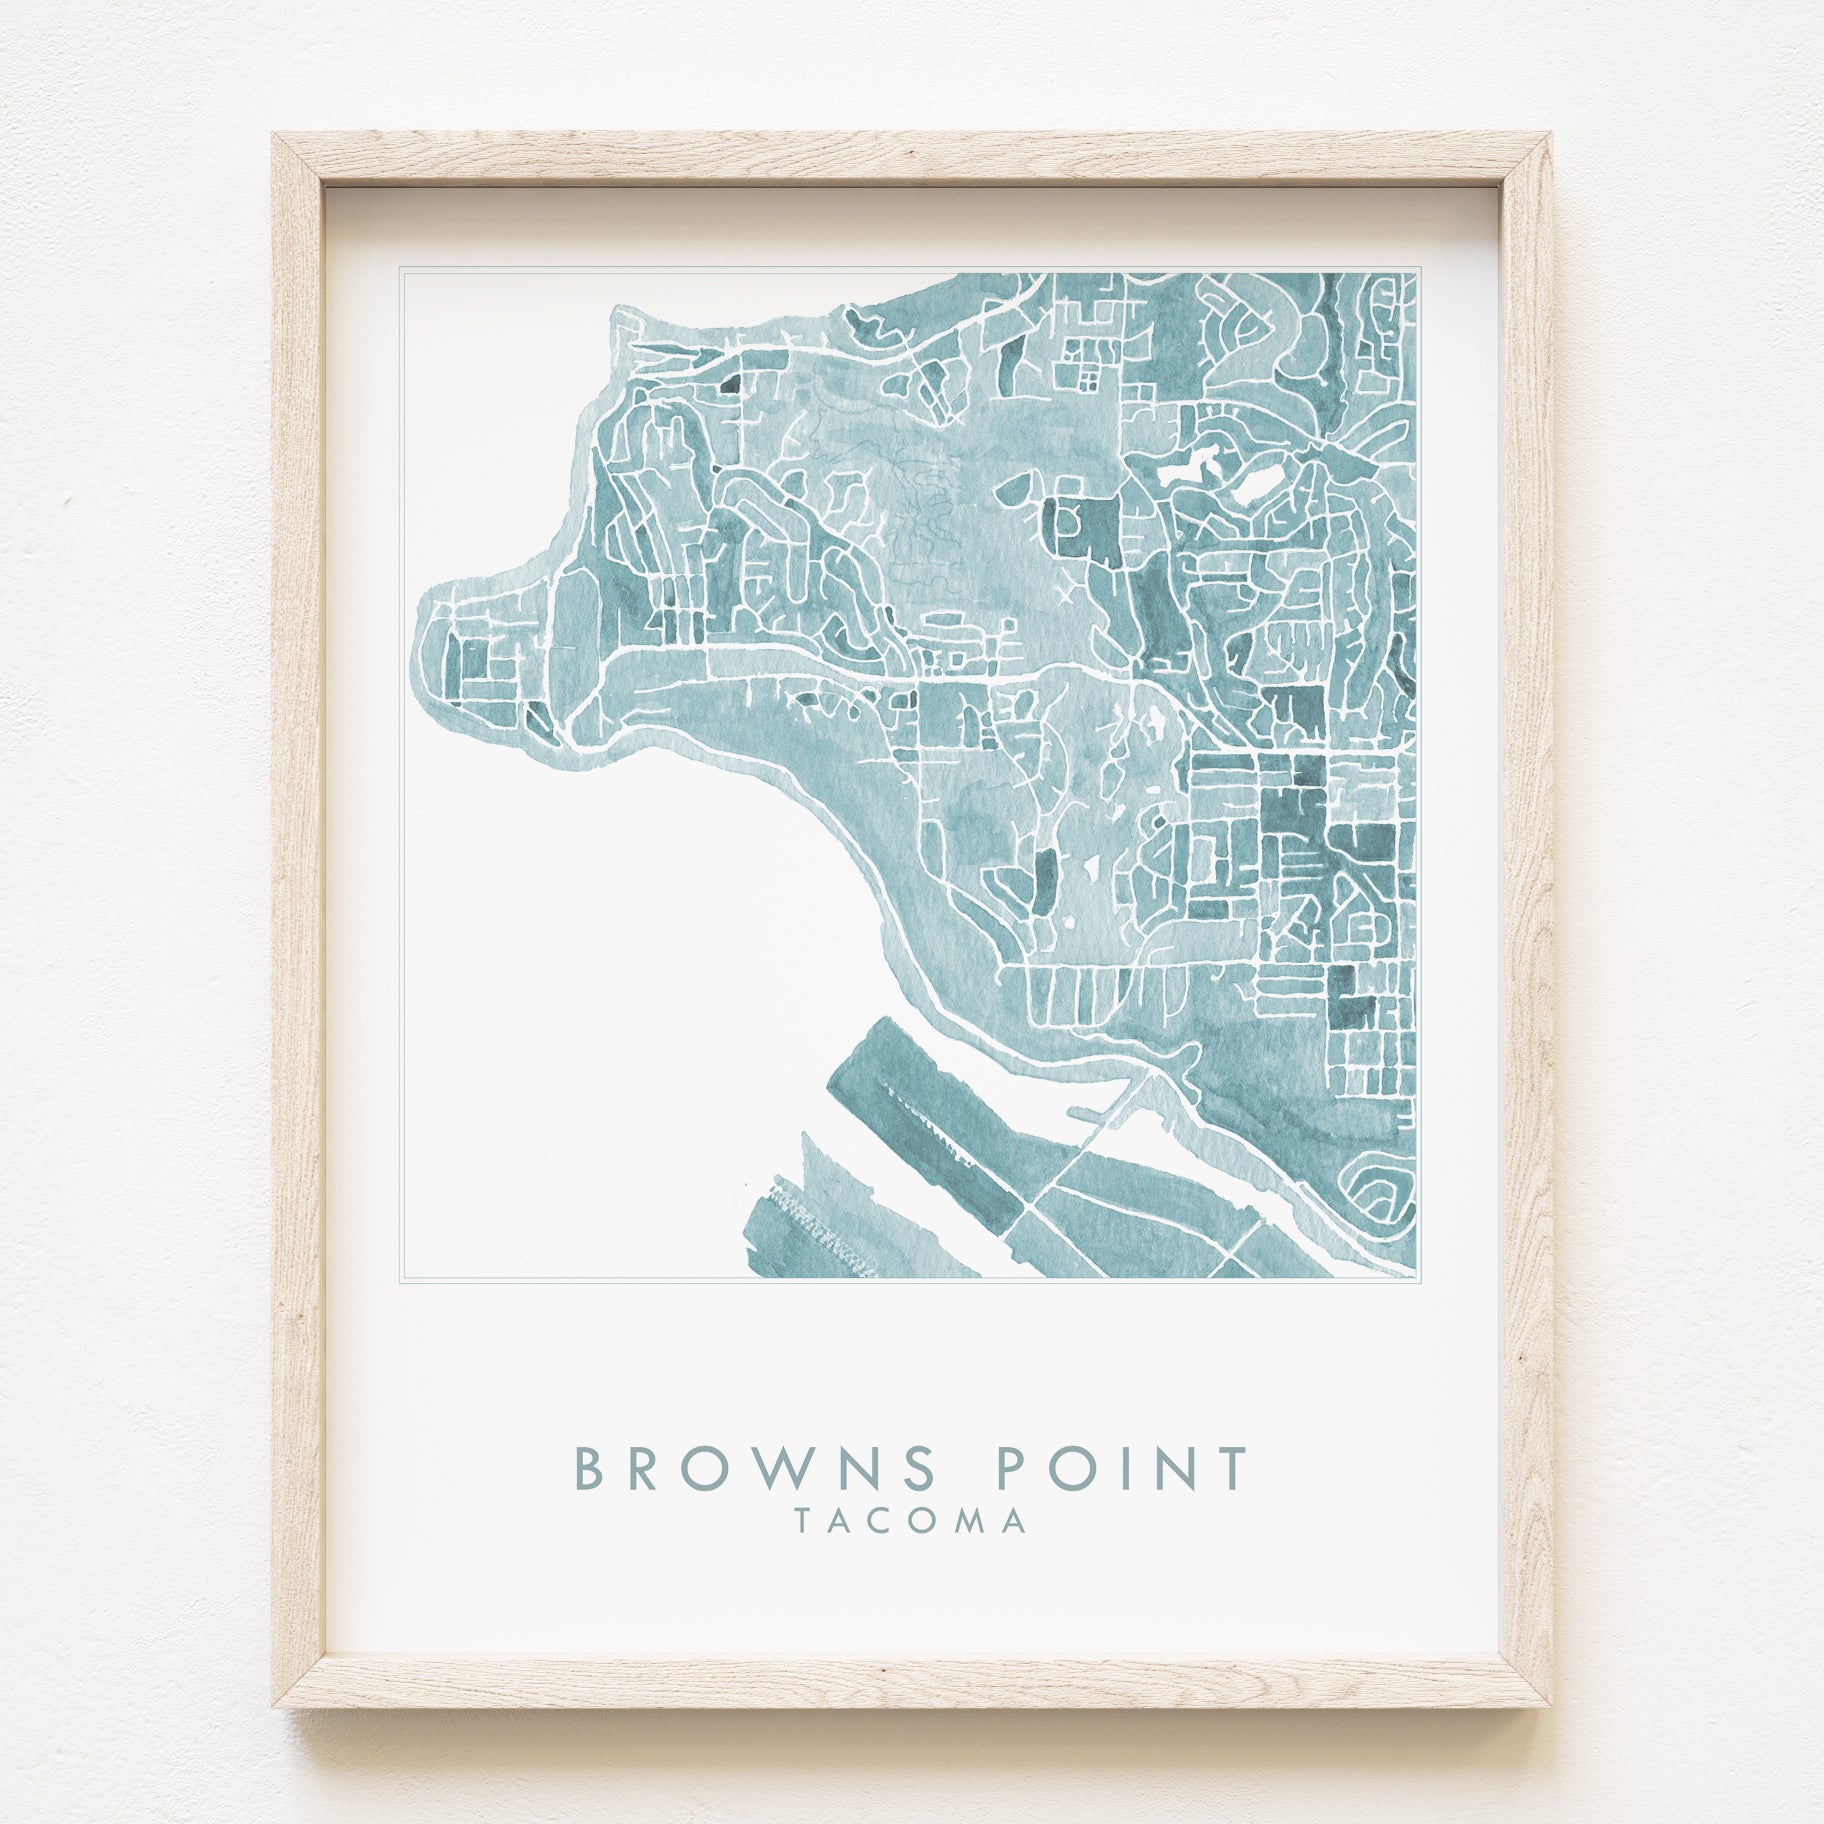 Browns Point TACOMA Neighborhood Watercolor Map: PRINT